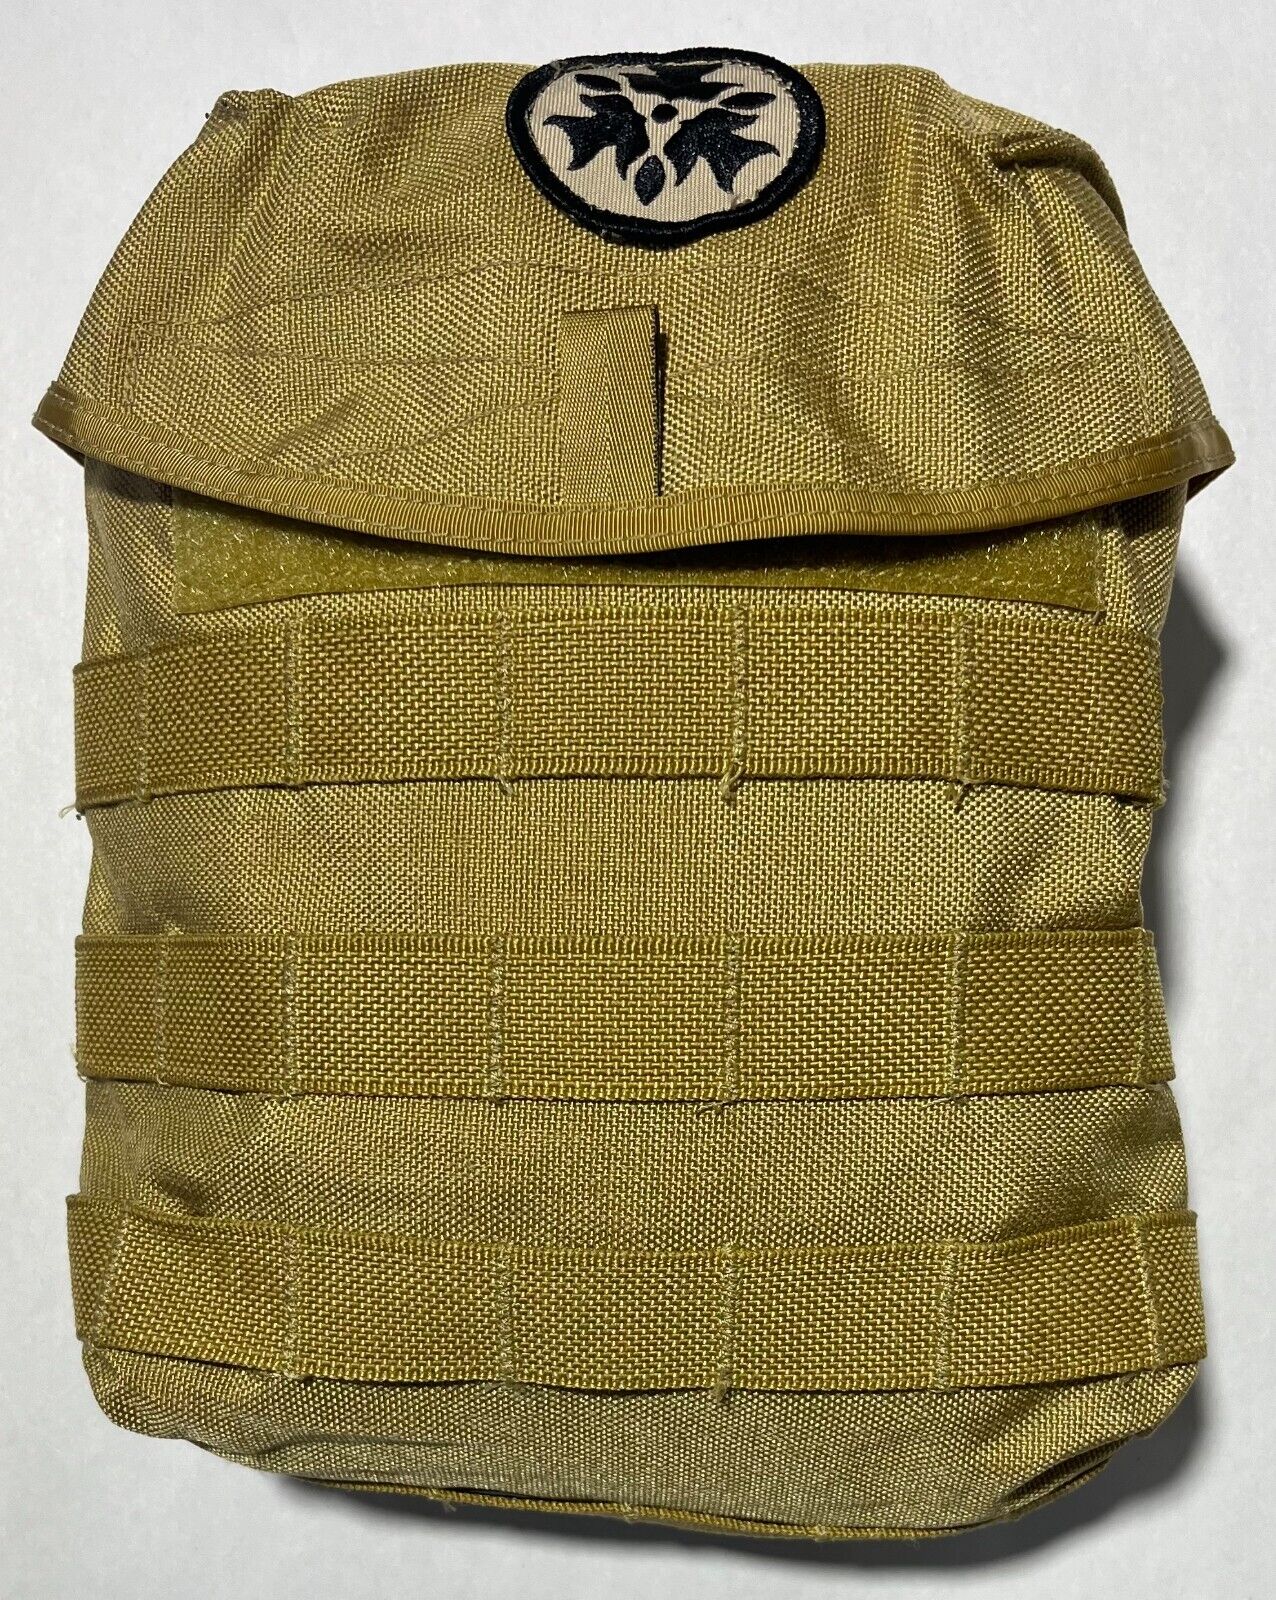 MAG DUMP POUCH MOLLE MALICE (3) Wheat TACTICAL ASSAULT SYSTEMS Stillwood NEW USA